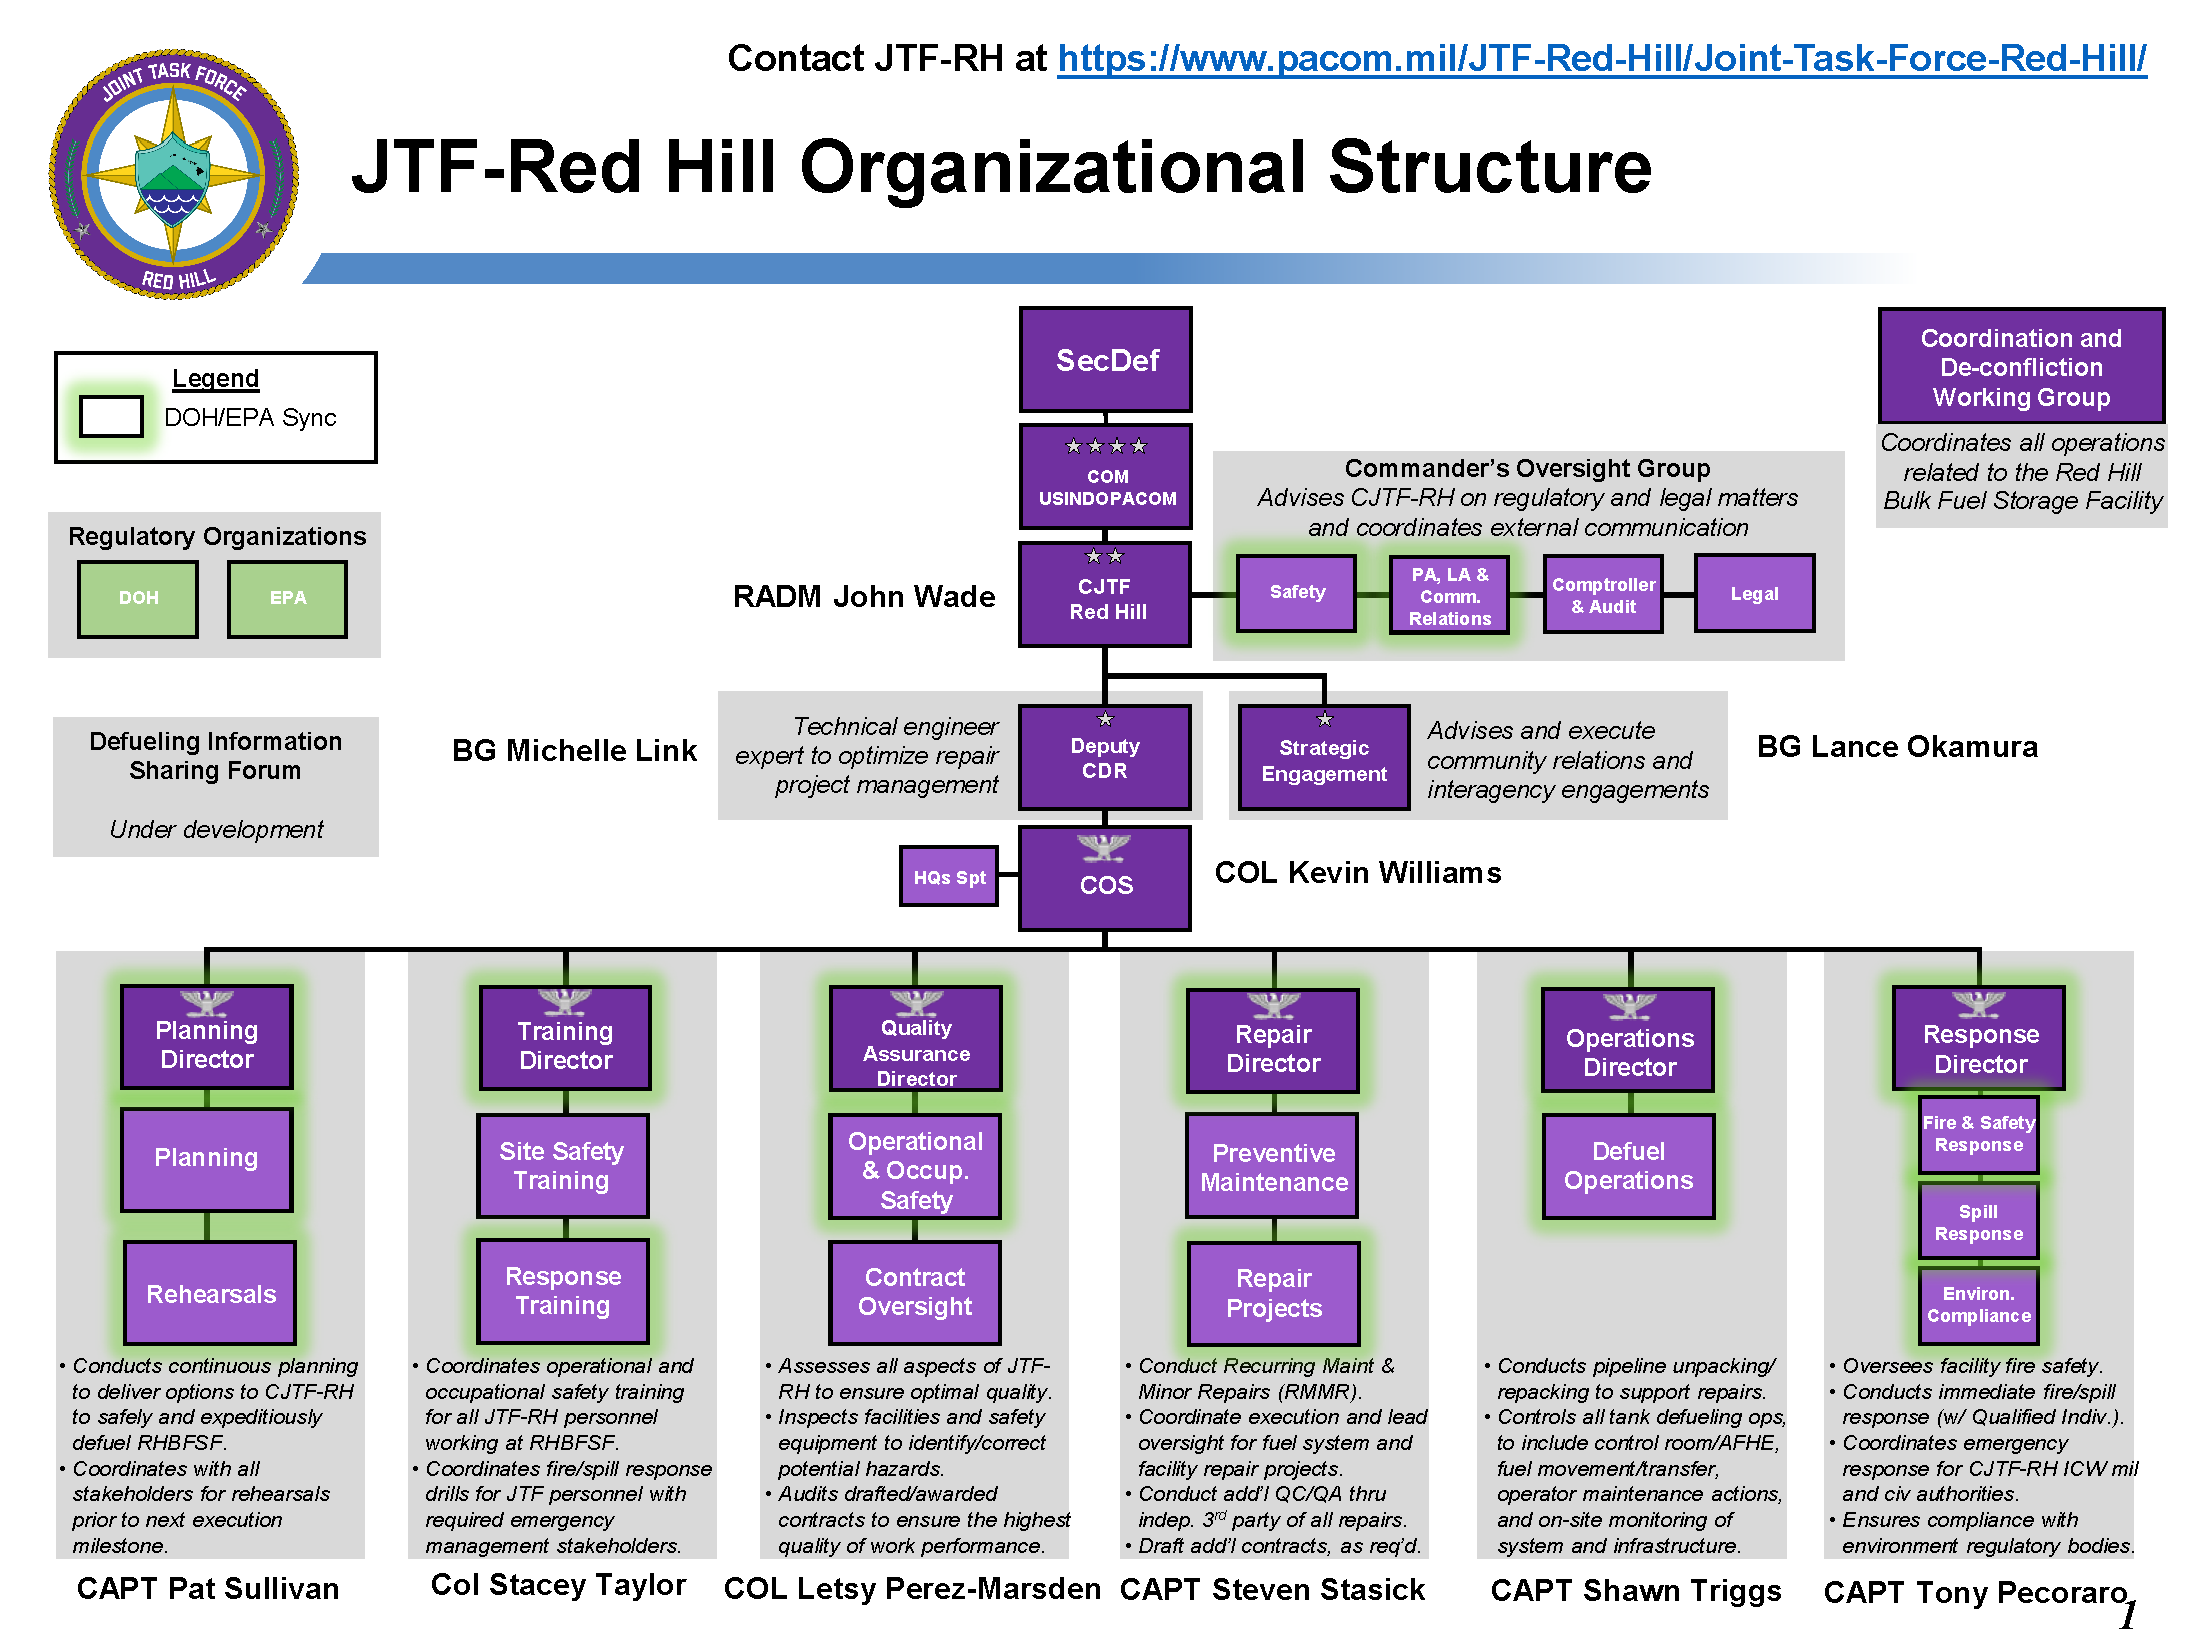 jtf-red hill organizational structure 11-10-2022